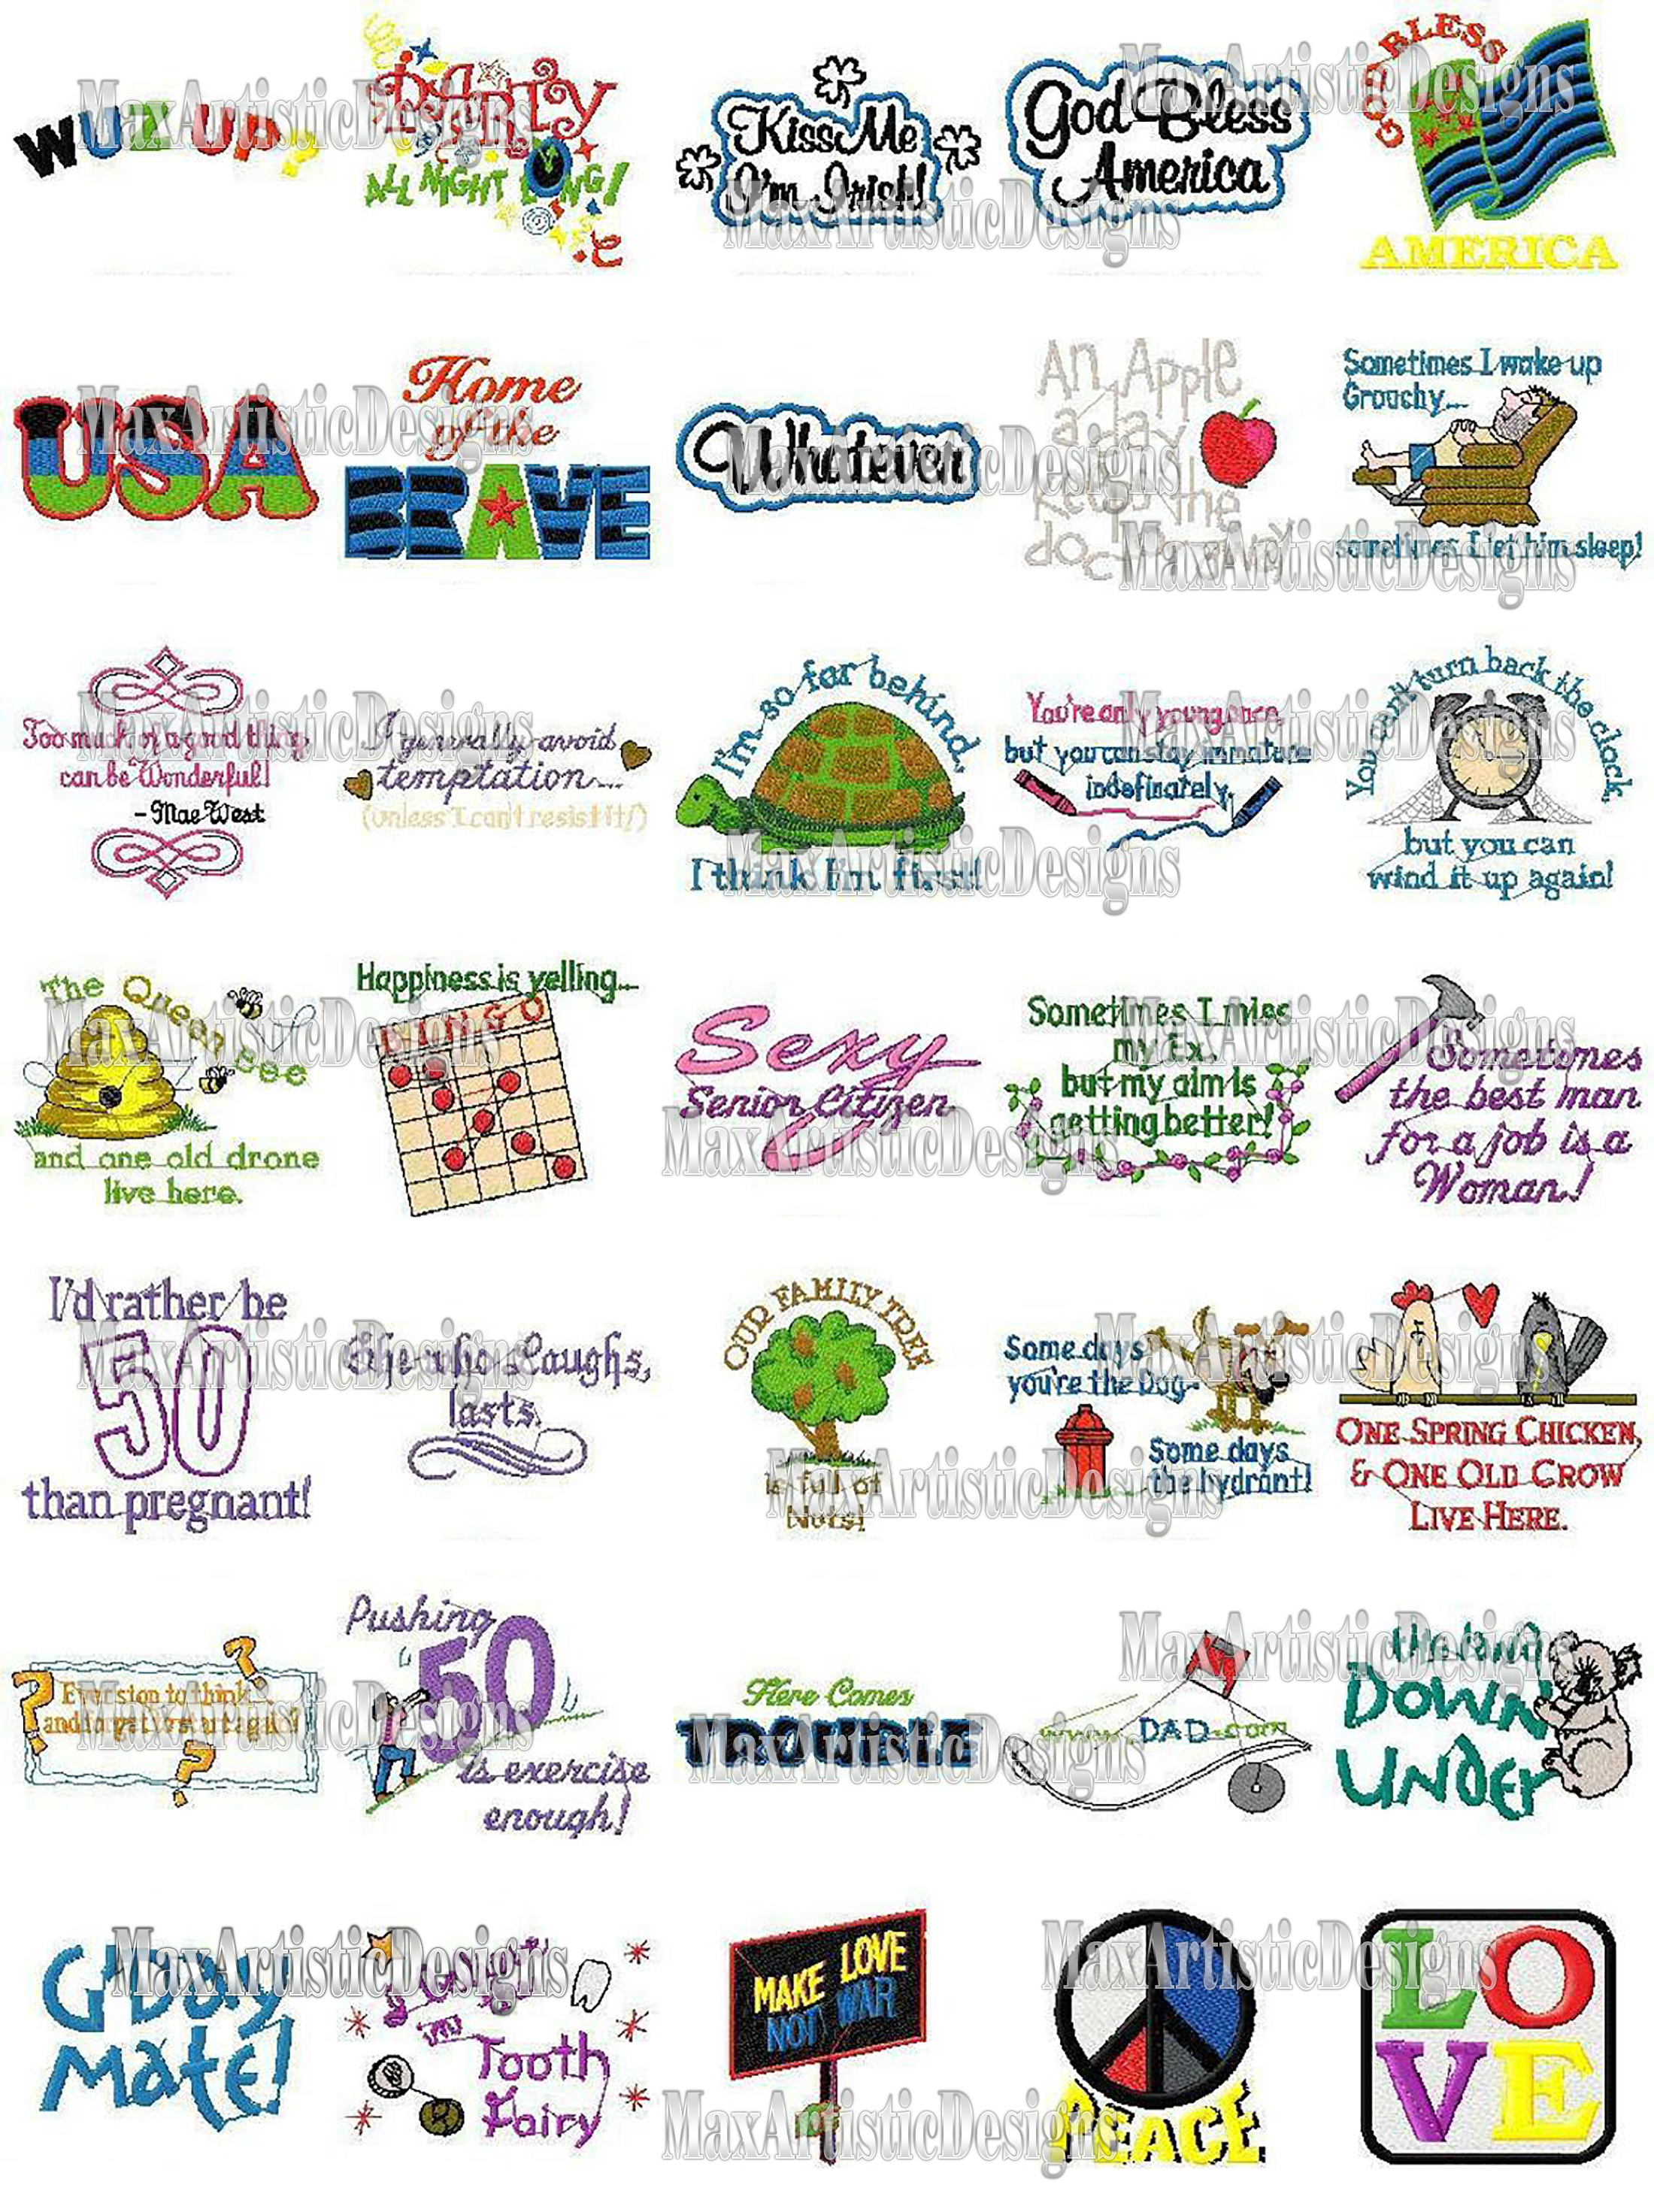 1000+ embroidery greetings slogans sayings embroidery machine patterns in pes file format